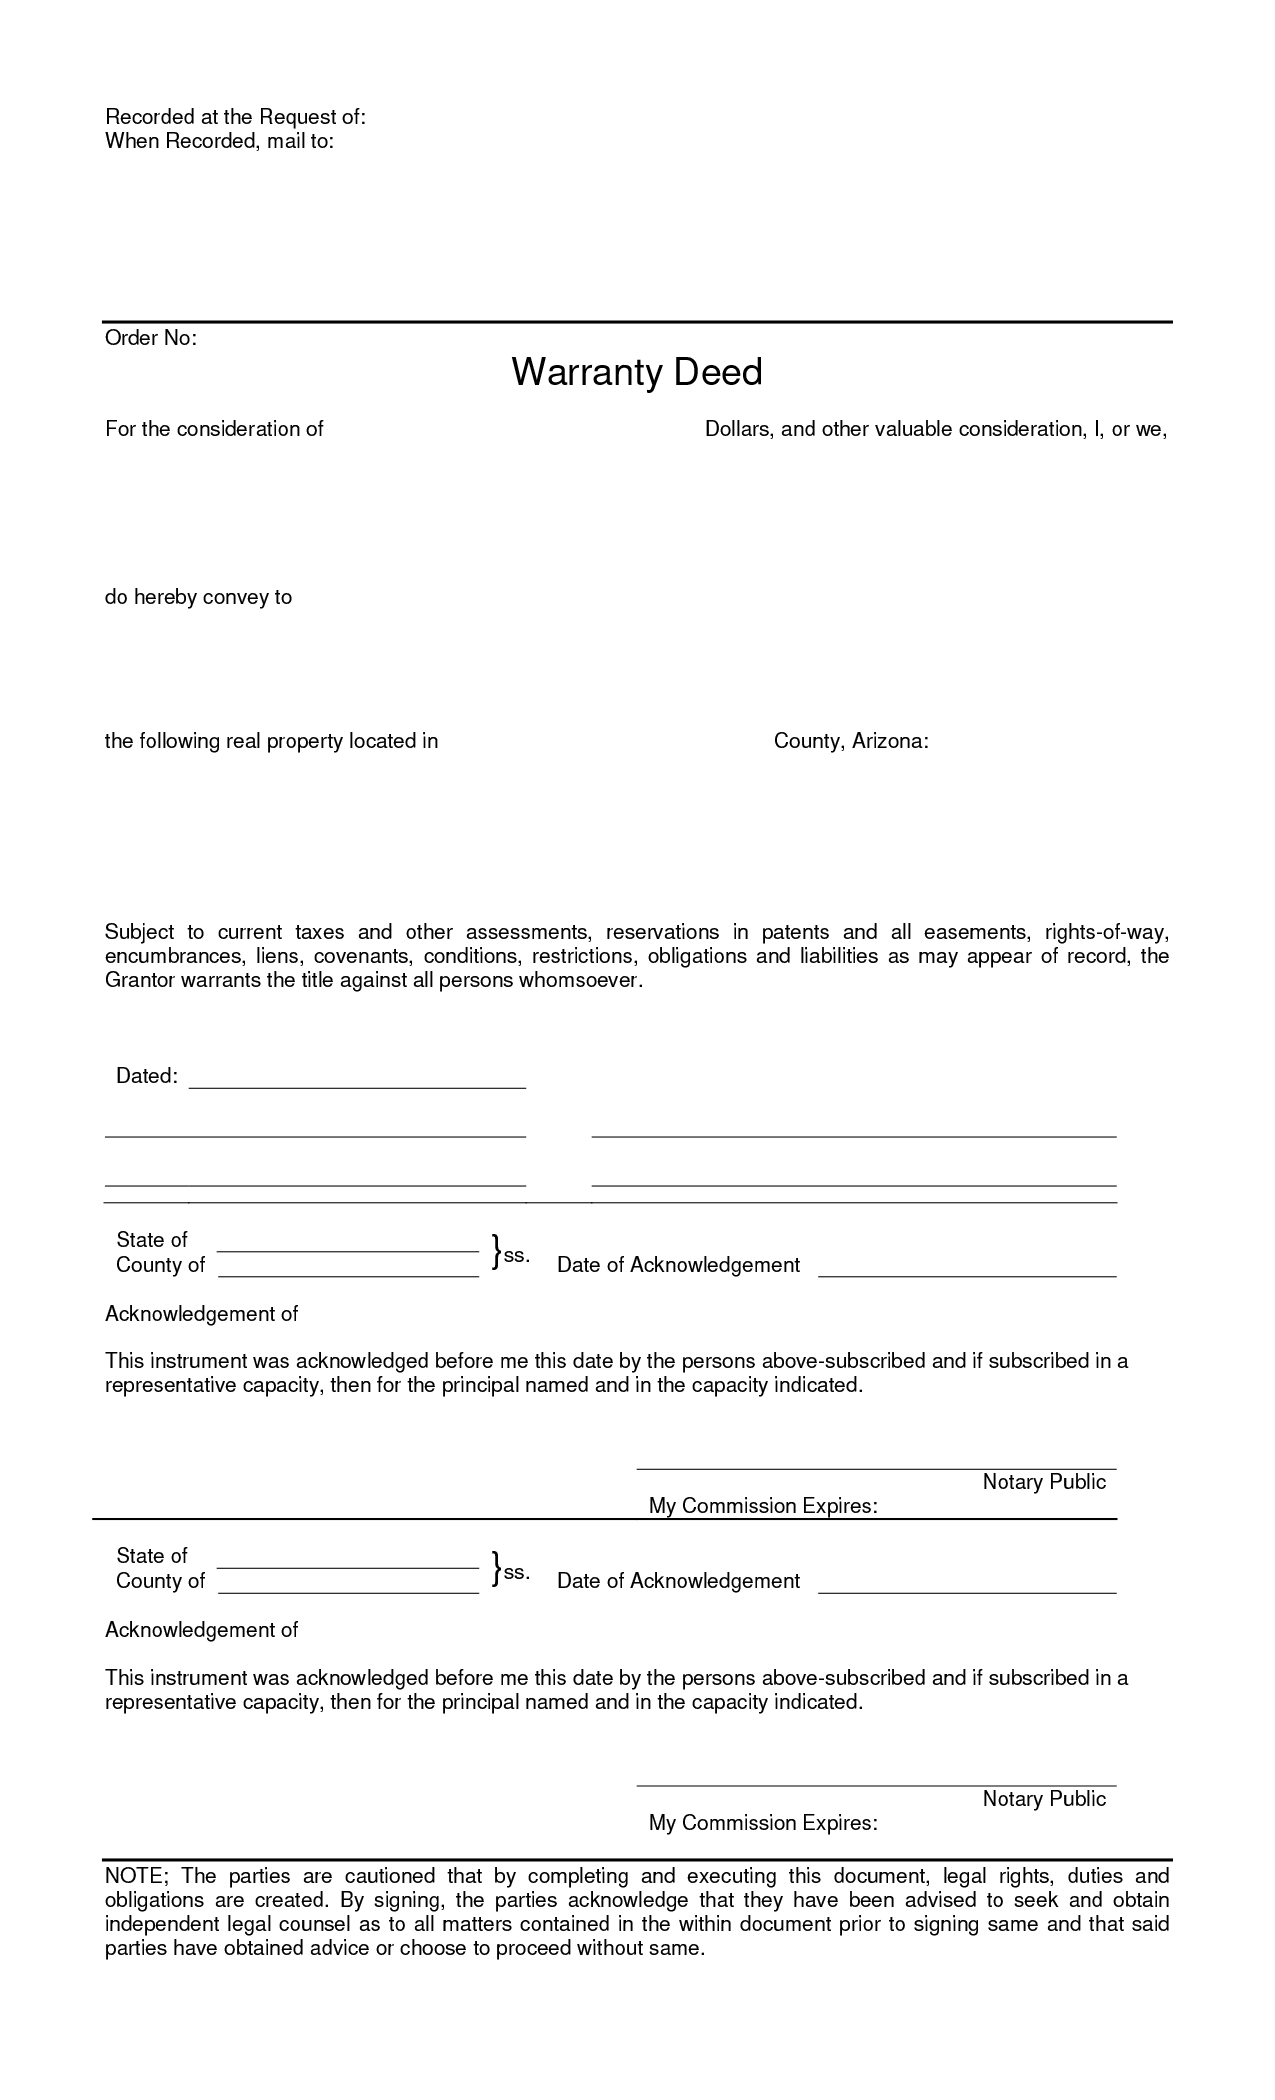 printable-warranty-deed-texas-printable-form-templates-and-letter